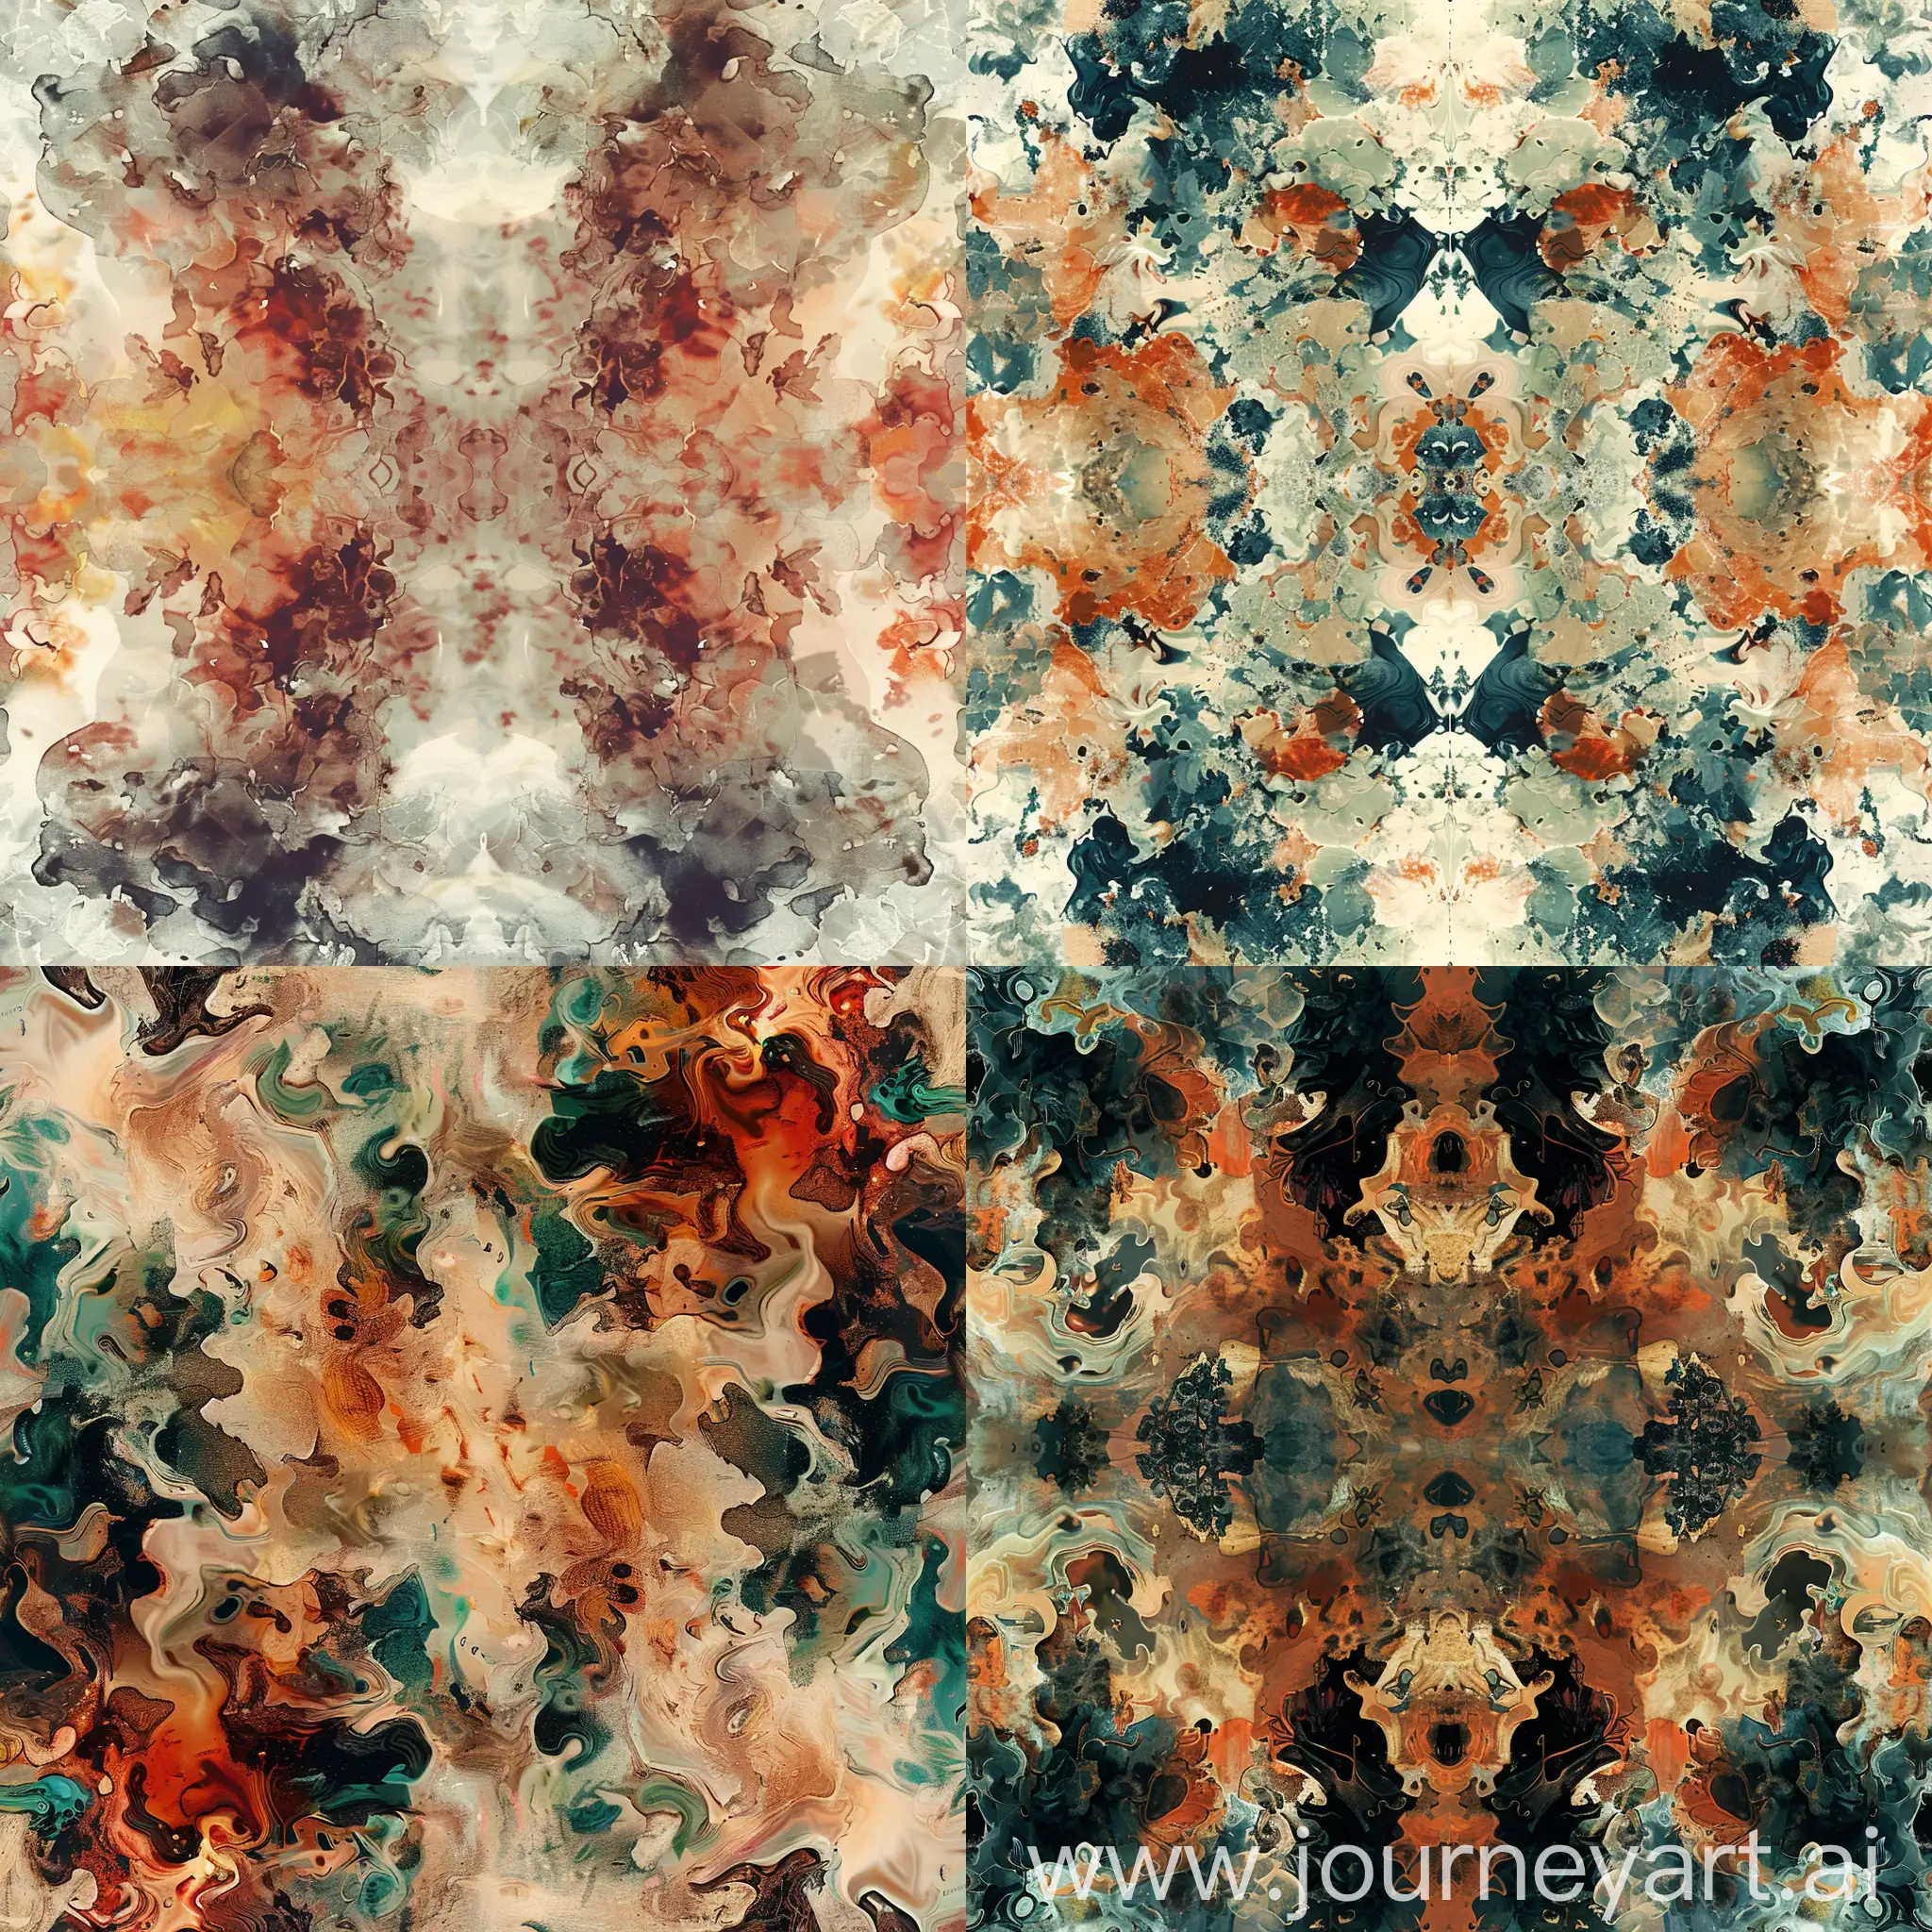 Create a full-screen, organic, and generative image that embodies an ambient and experimental music theme. The design should fill the entire canvas, resembling a rich tapestry of inkblots, watercolor washes, or fluid art. There should be no central object or figure, just a seamless, abstract pattern that looks spontaneous and alive, with a harmonious blend of earthy and cool colors.